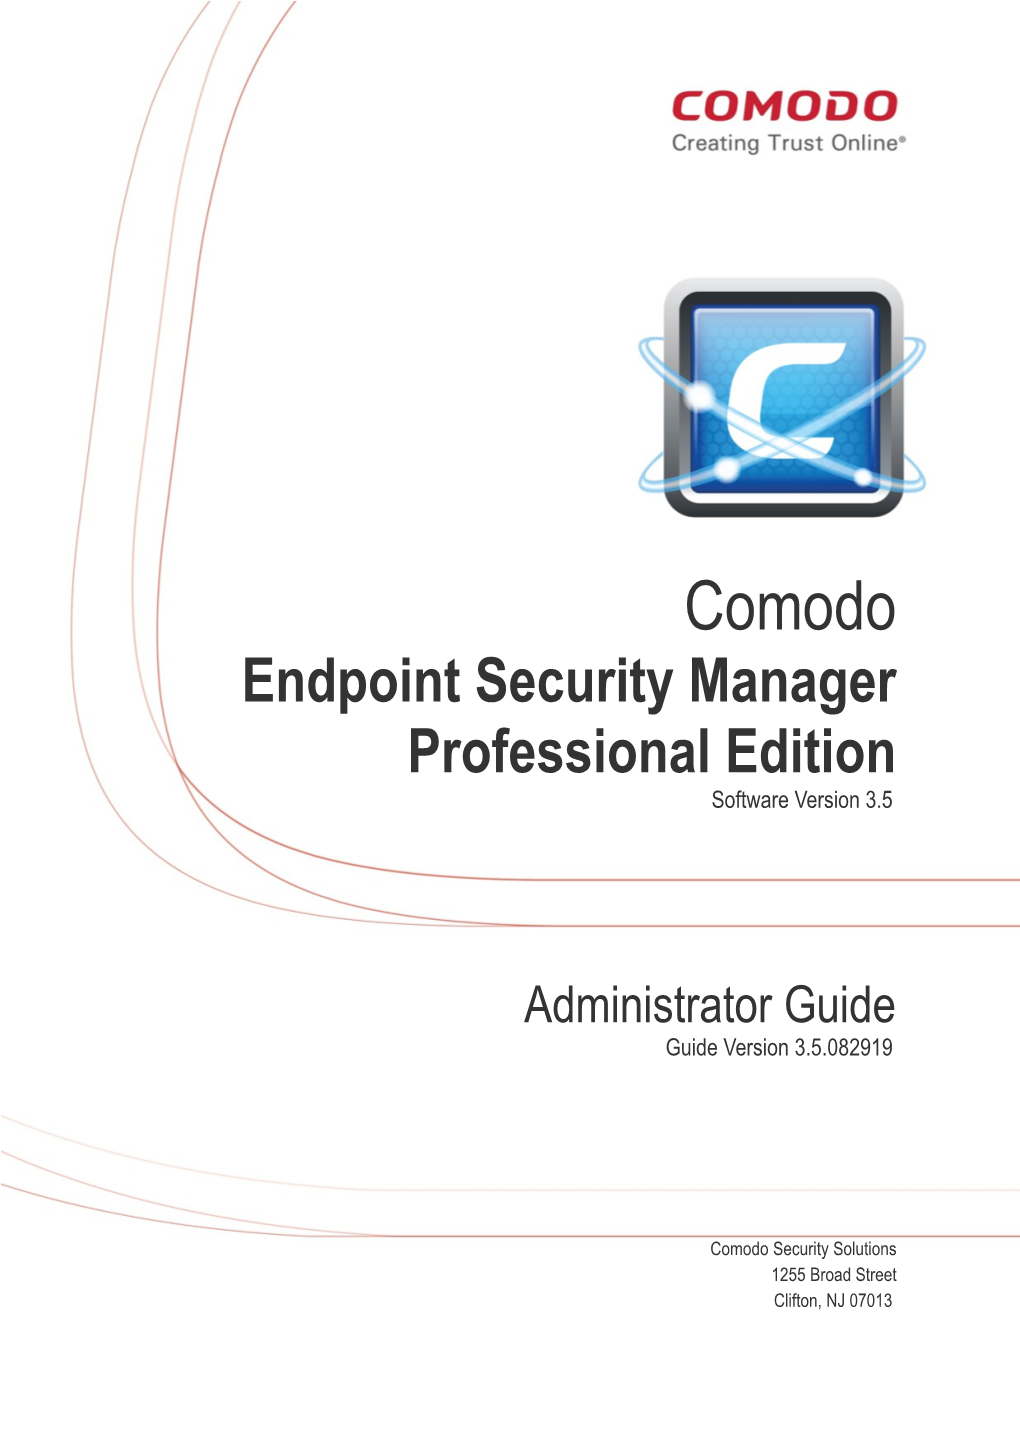 Endpoint Security Manager Professional Edition Software Version 3.5